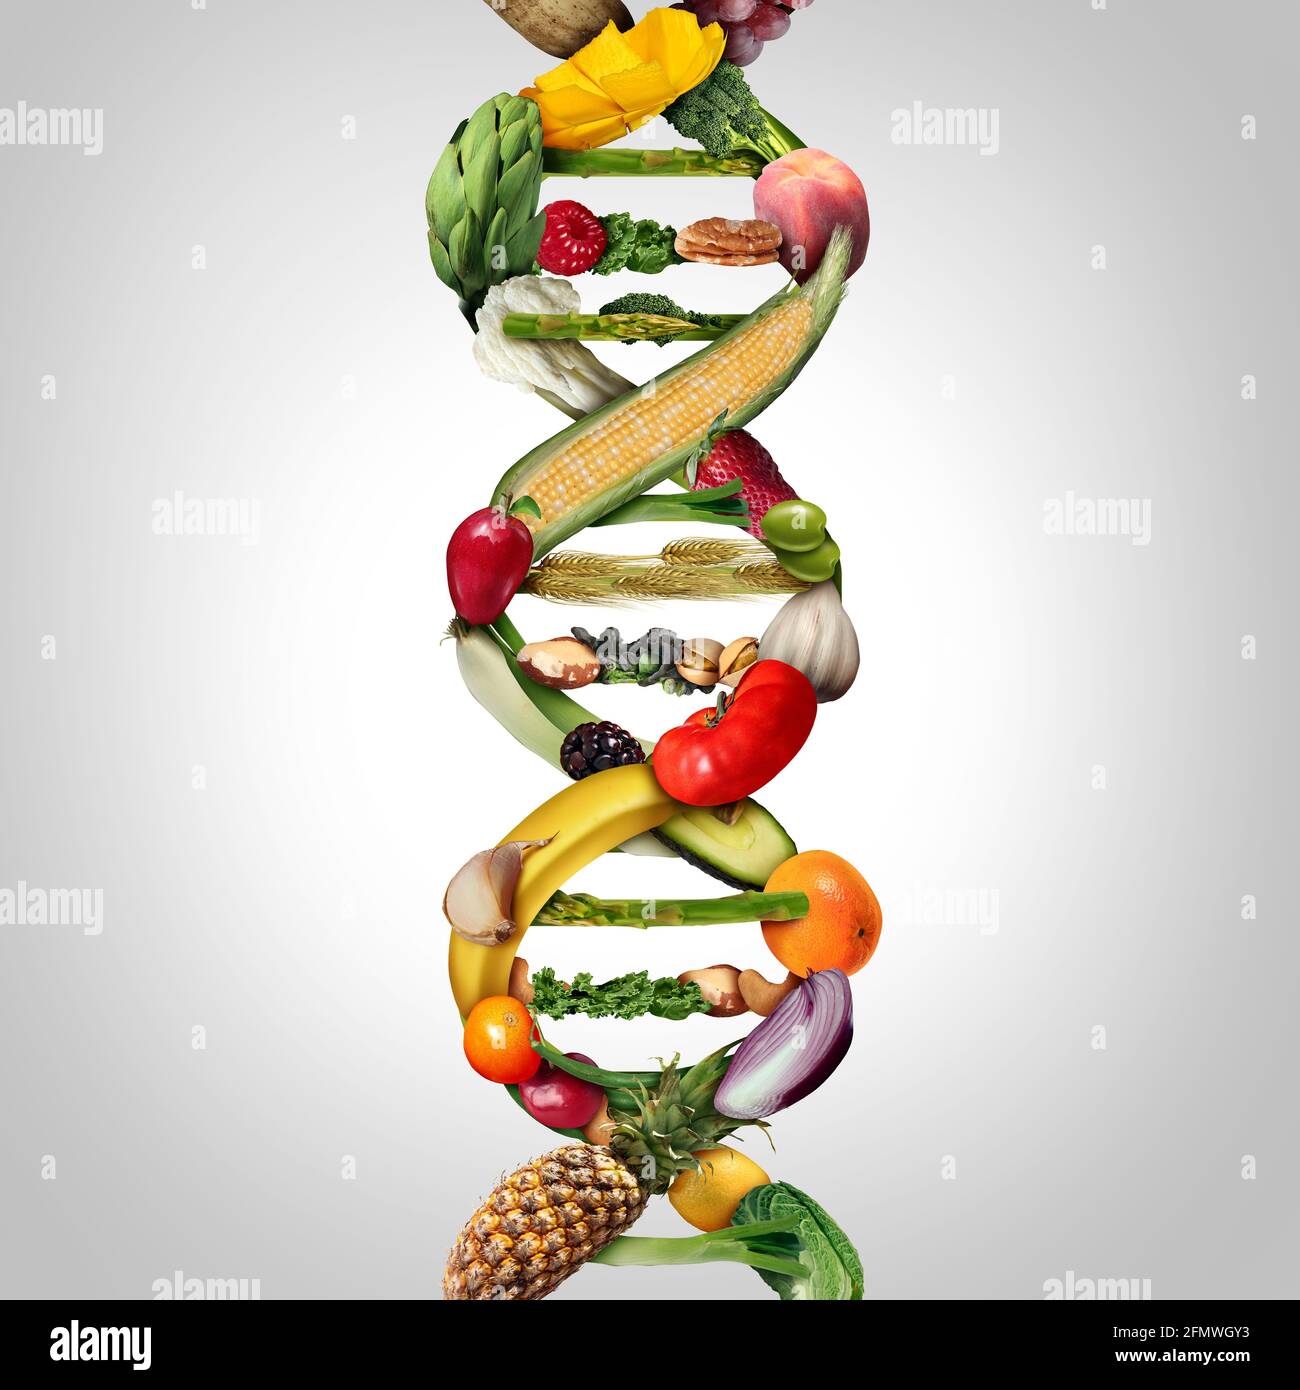 GMO food and Genetically modified crops or engineered agriculture concept using biotechnology and genetic manipulation through biology science. Stock Photo